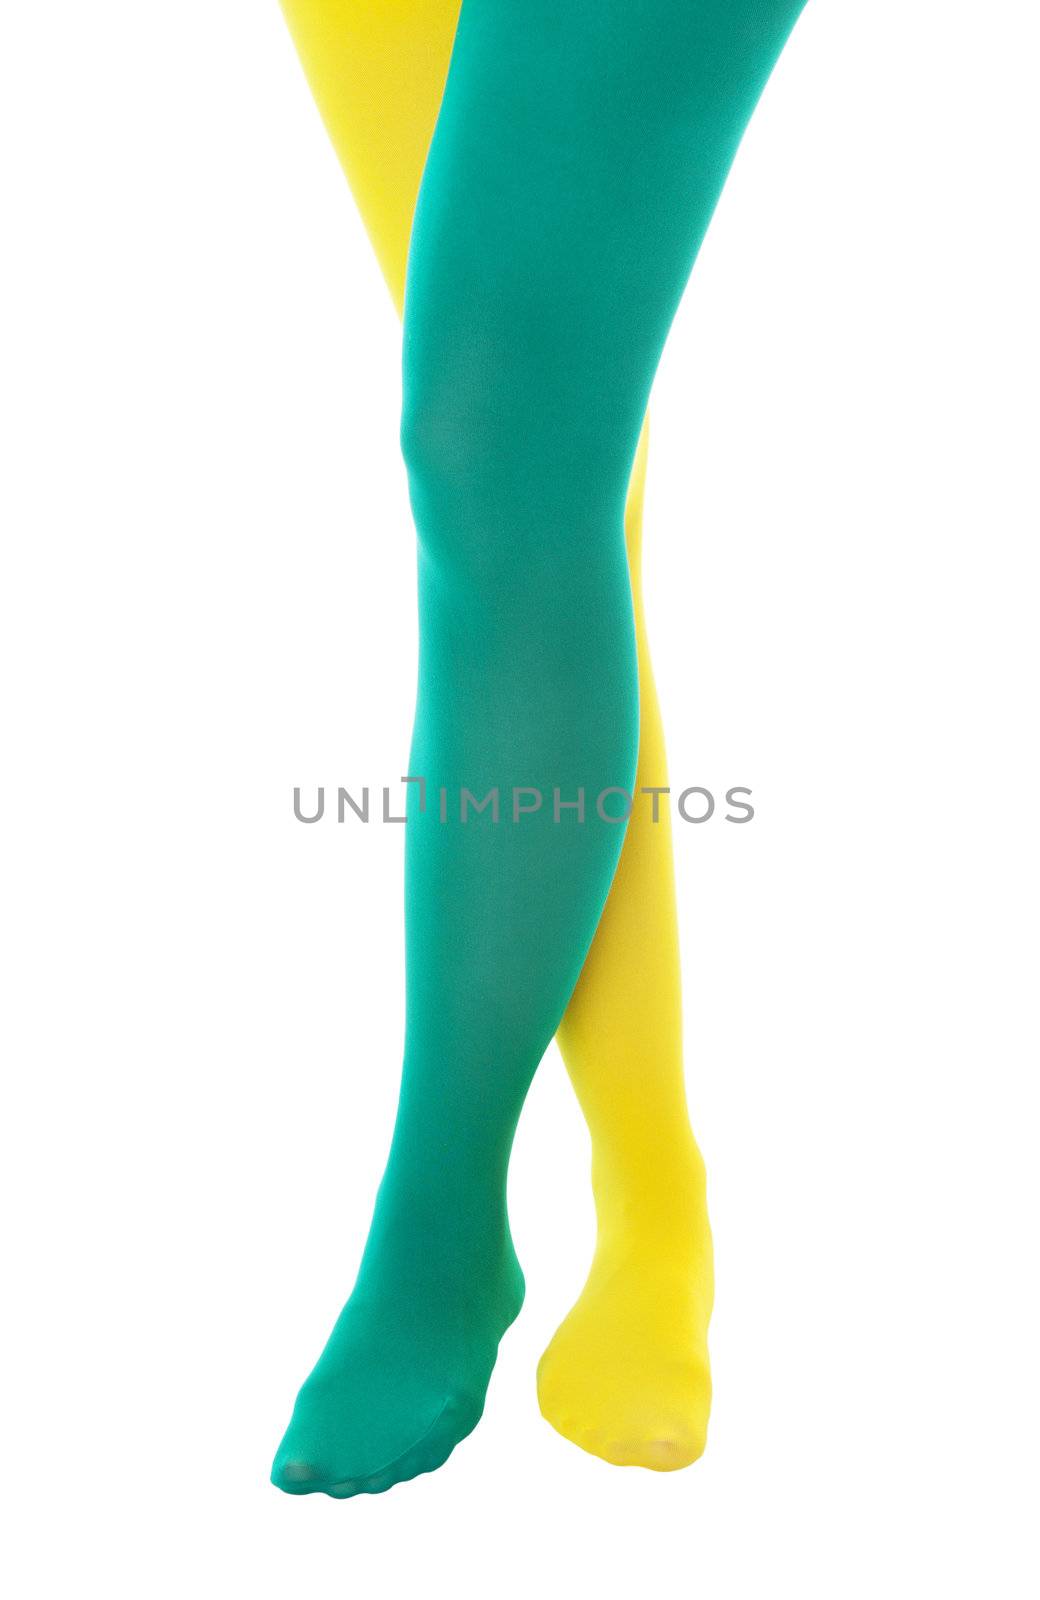 A girl showing team  or school spirit by wearing a green and a yellow stocking.  Shot on white background. 